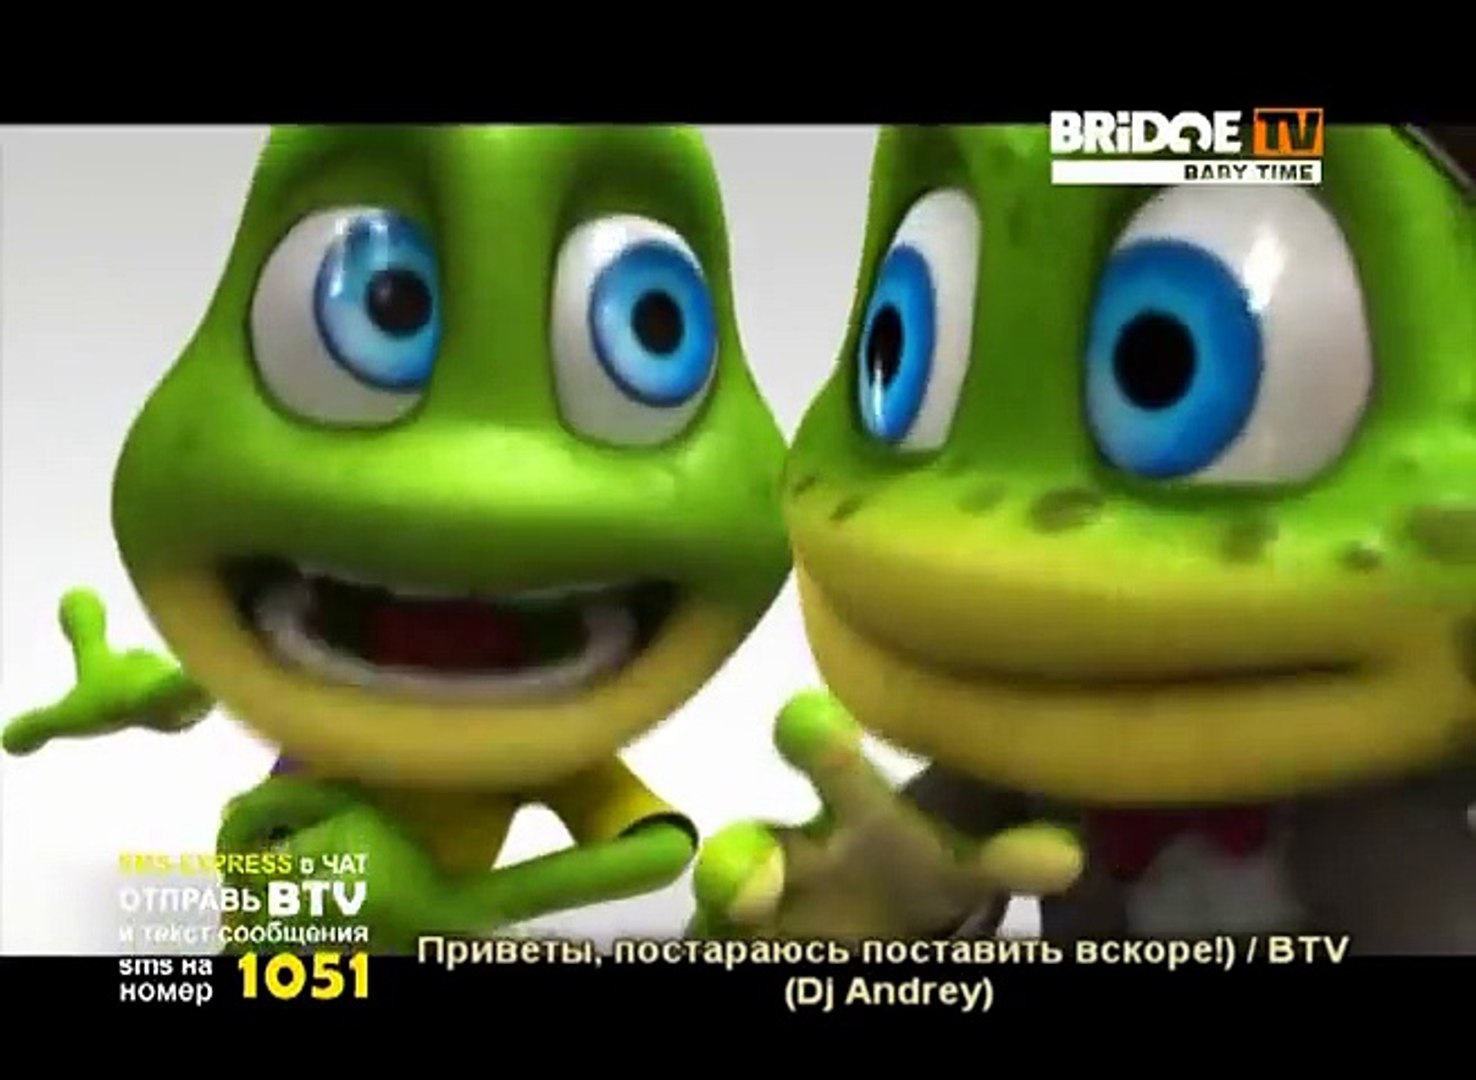 BABY TIME THE CRAZY FROGS the ding dong song 2011 - video Dailymotion